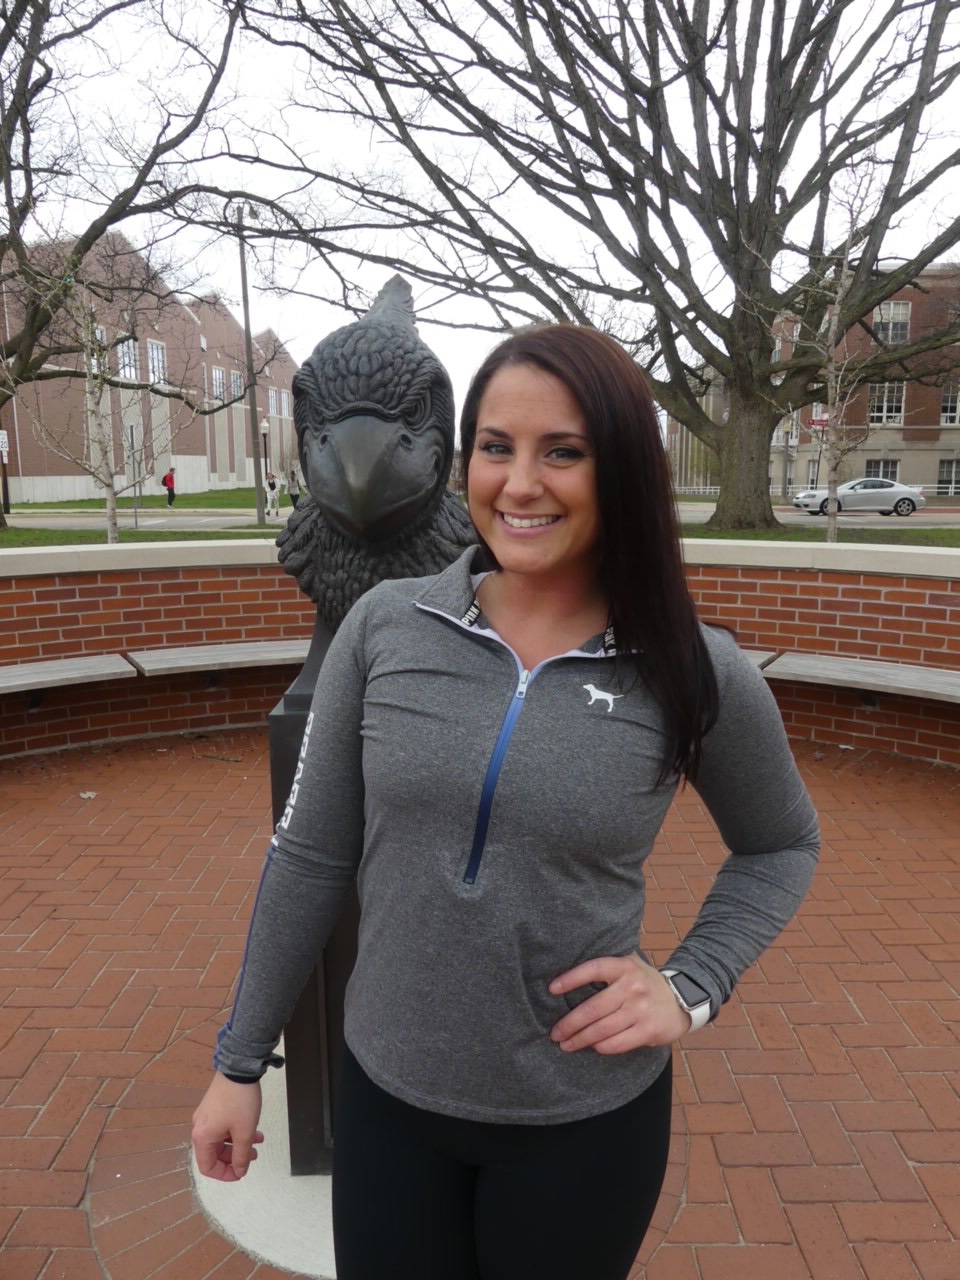 Kinesiology and Recreation student Danielle D'amato